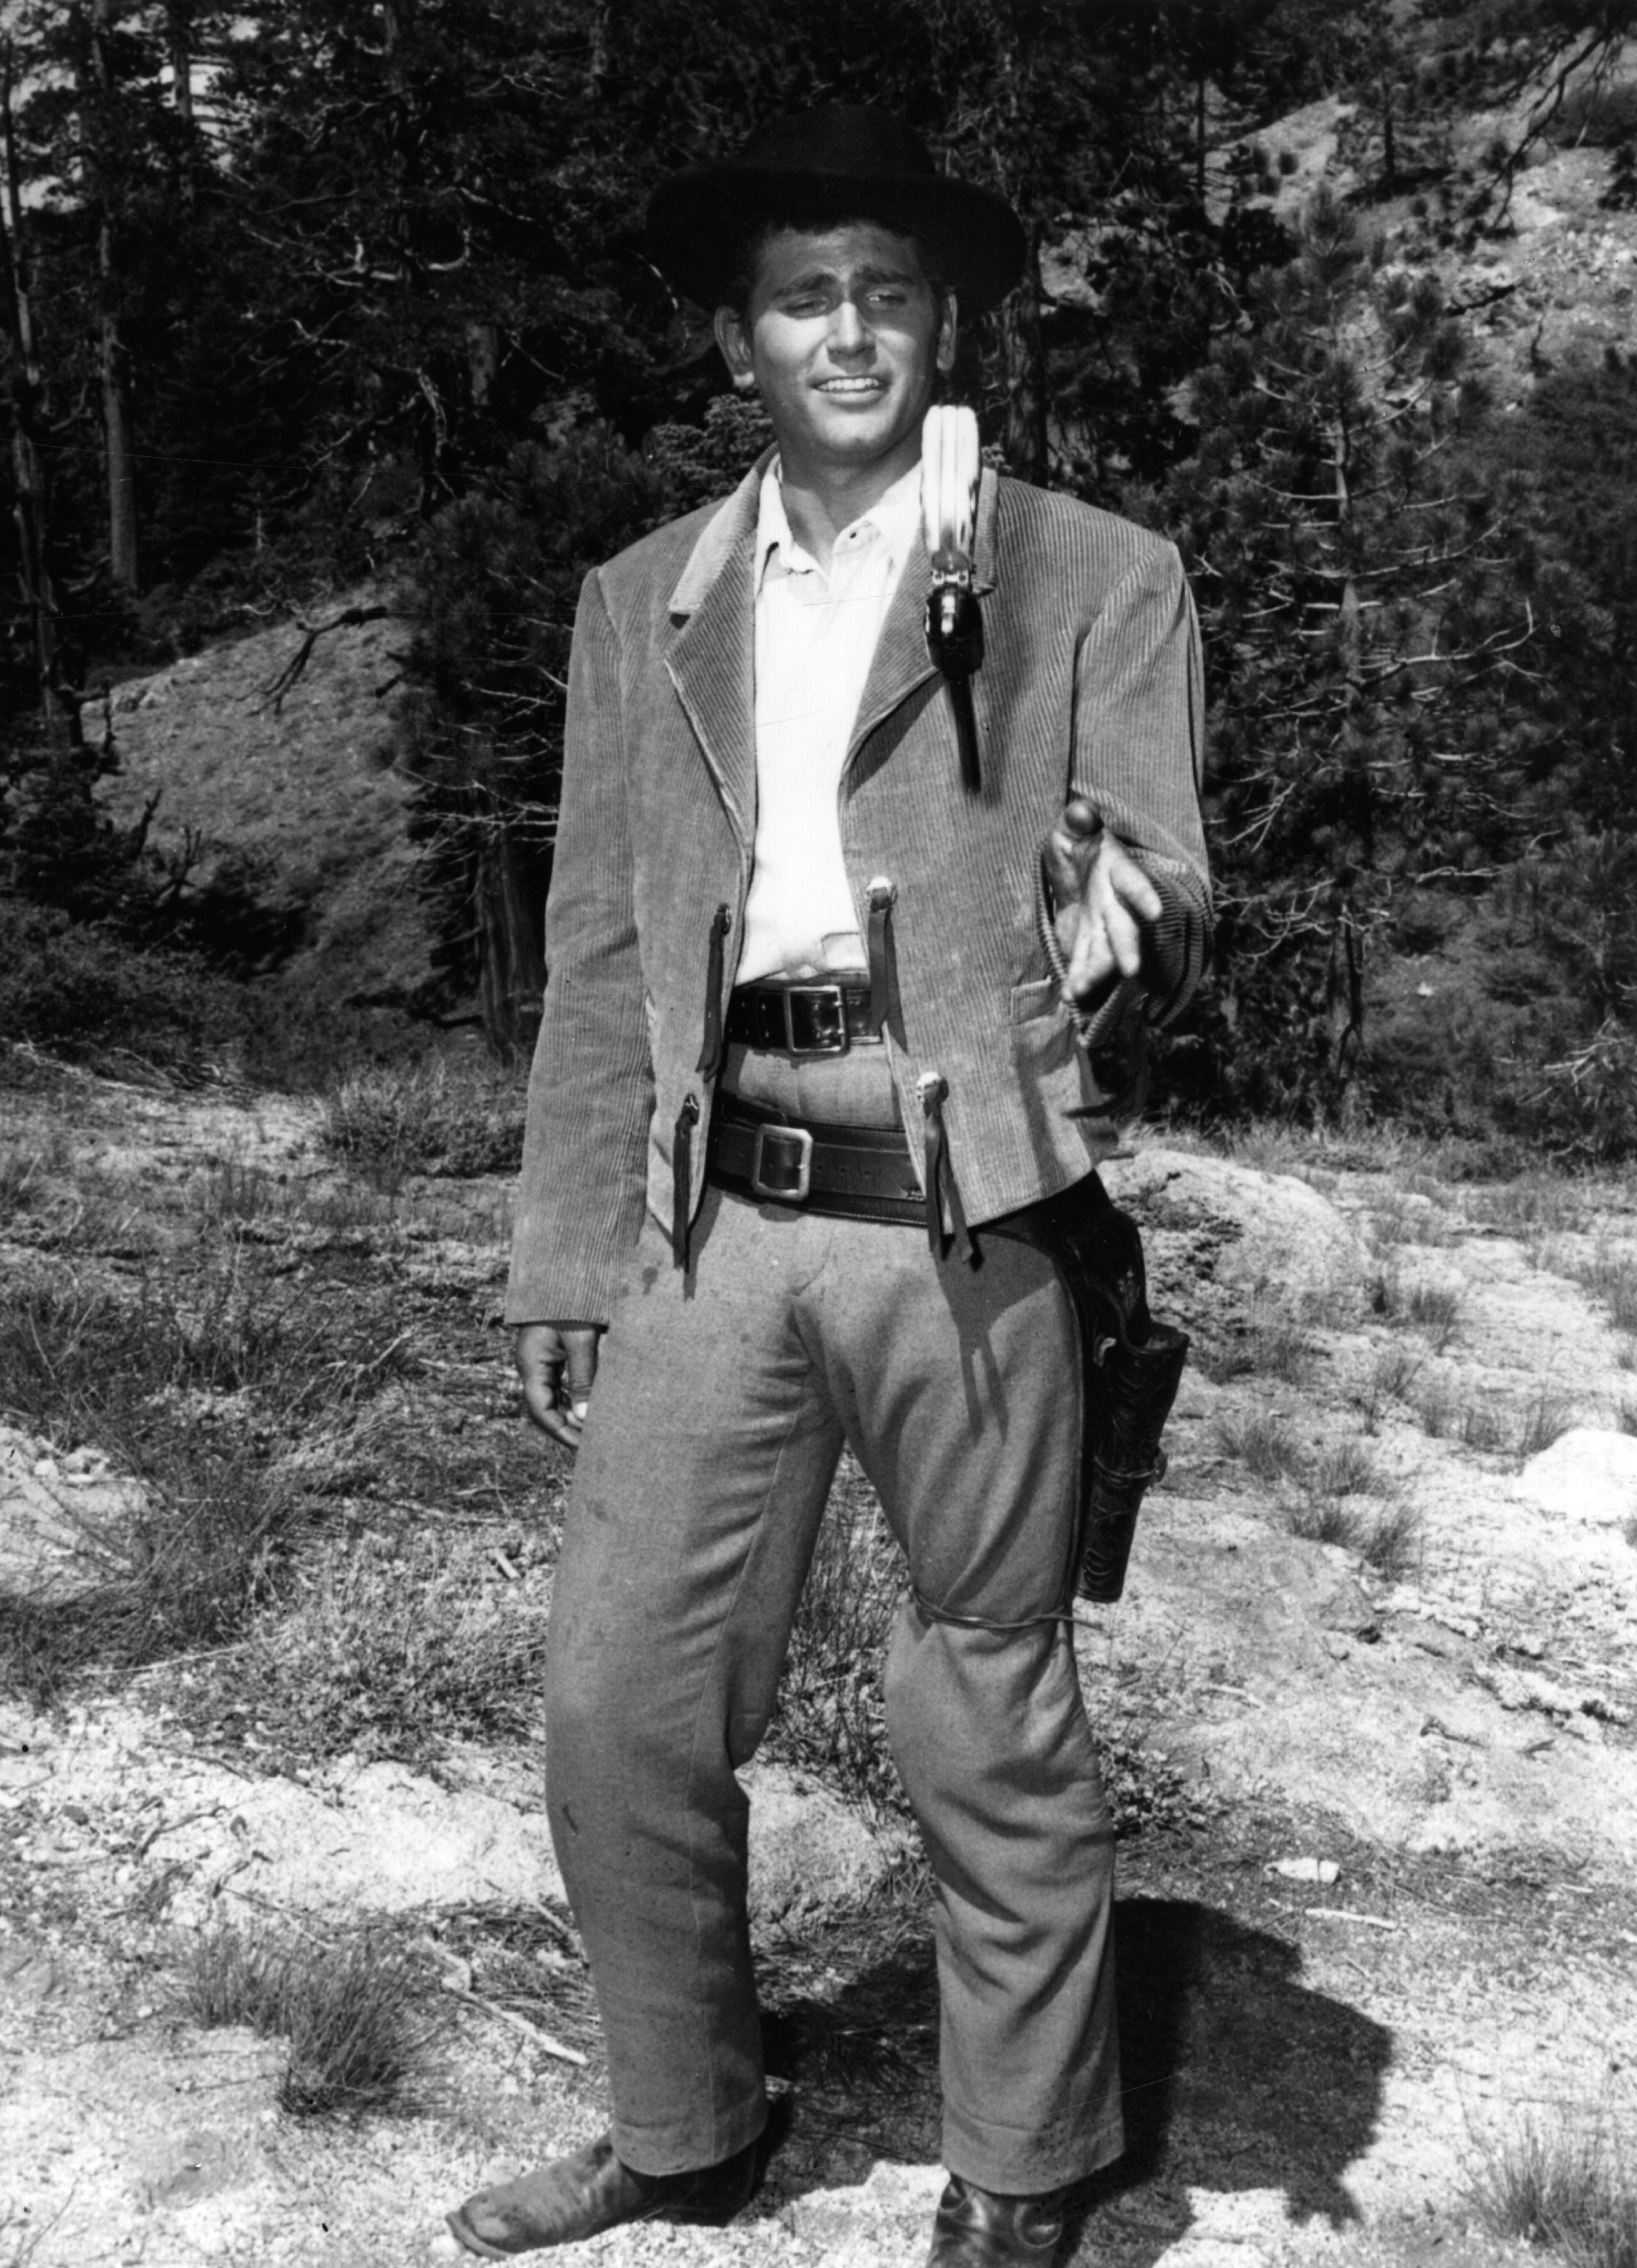 US actor, director and writer Michael Landon dressed for his role in the TV series "Bonanza" in 1960. | Source: Getty Images.